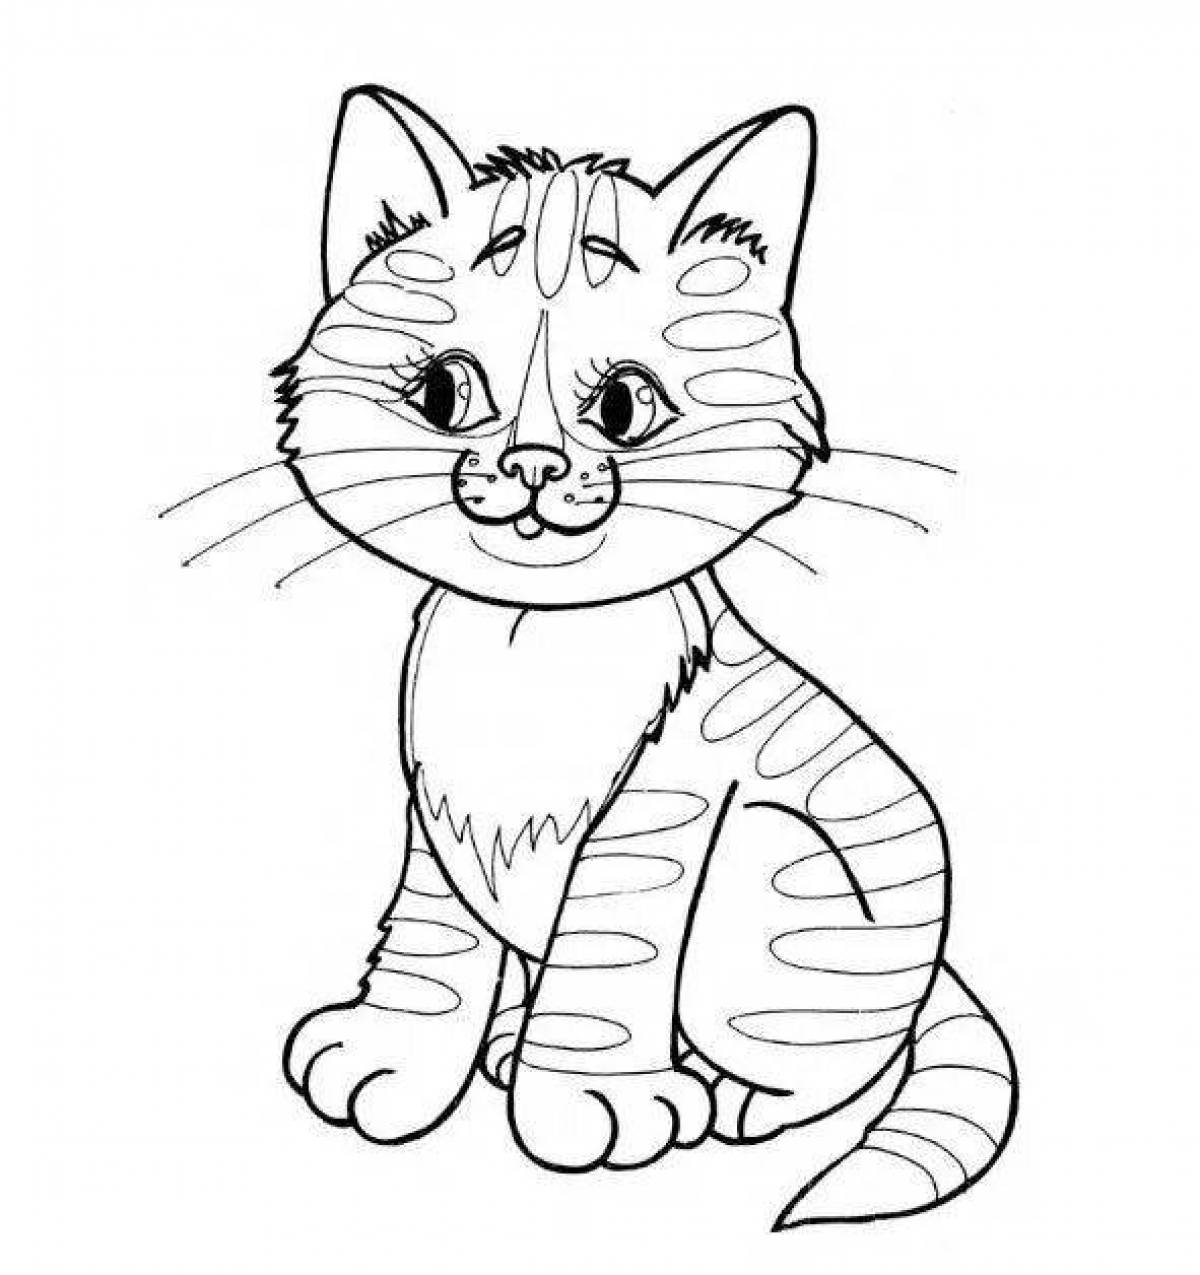 Animated pet coloring book